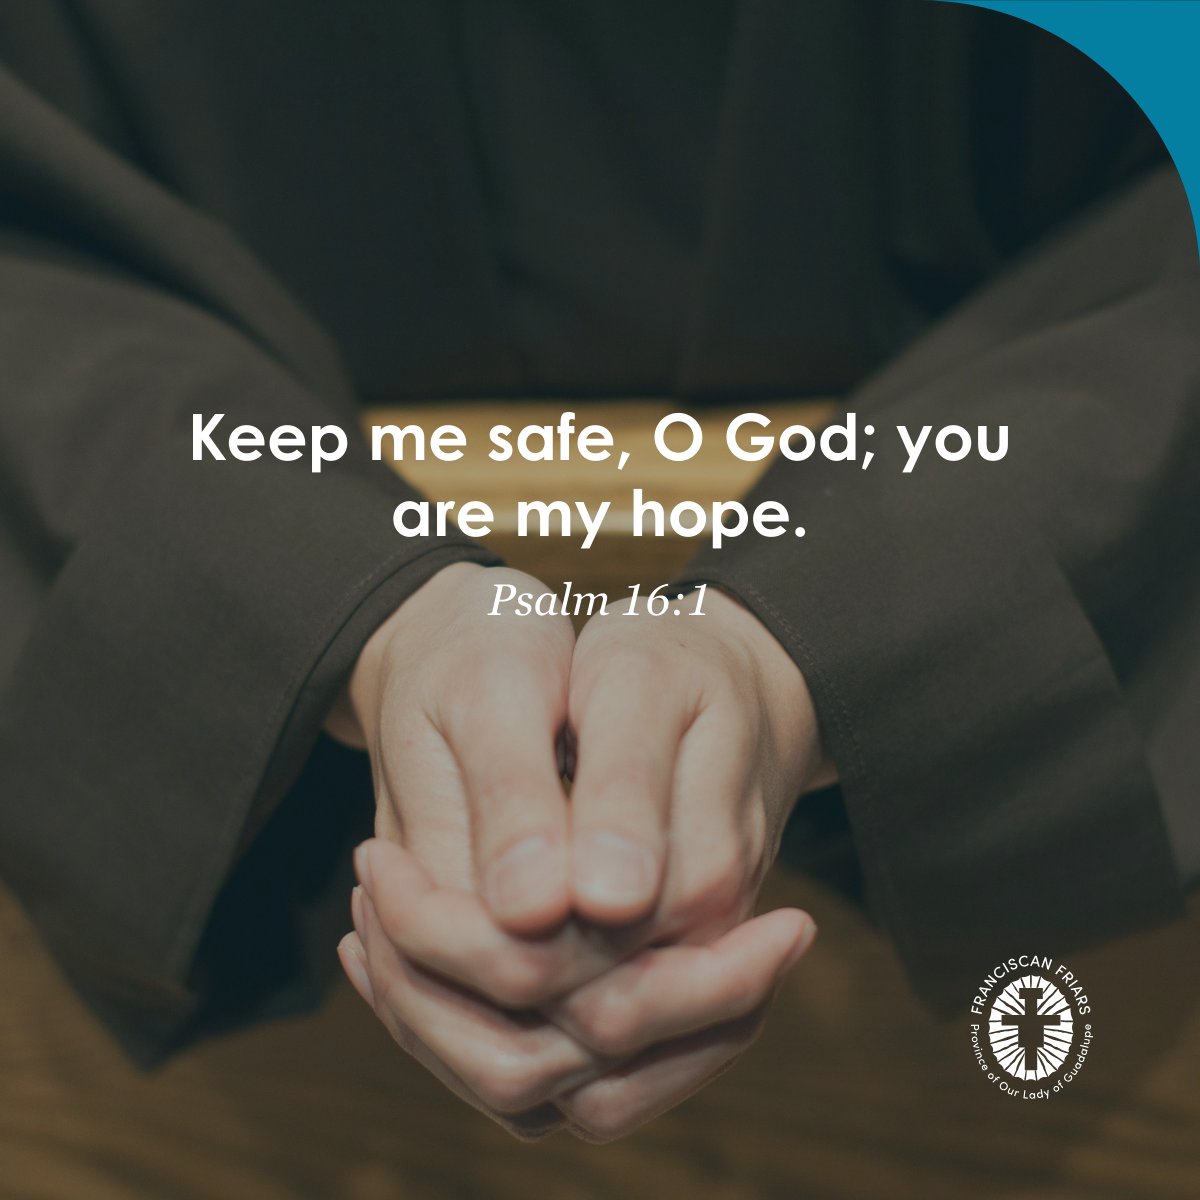 Comment 'Amen' if God is your hope! Take refuge in Him always.